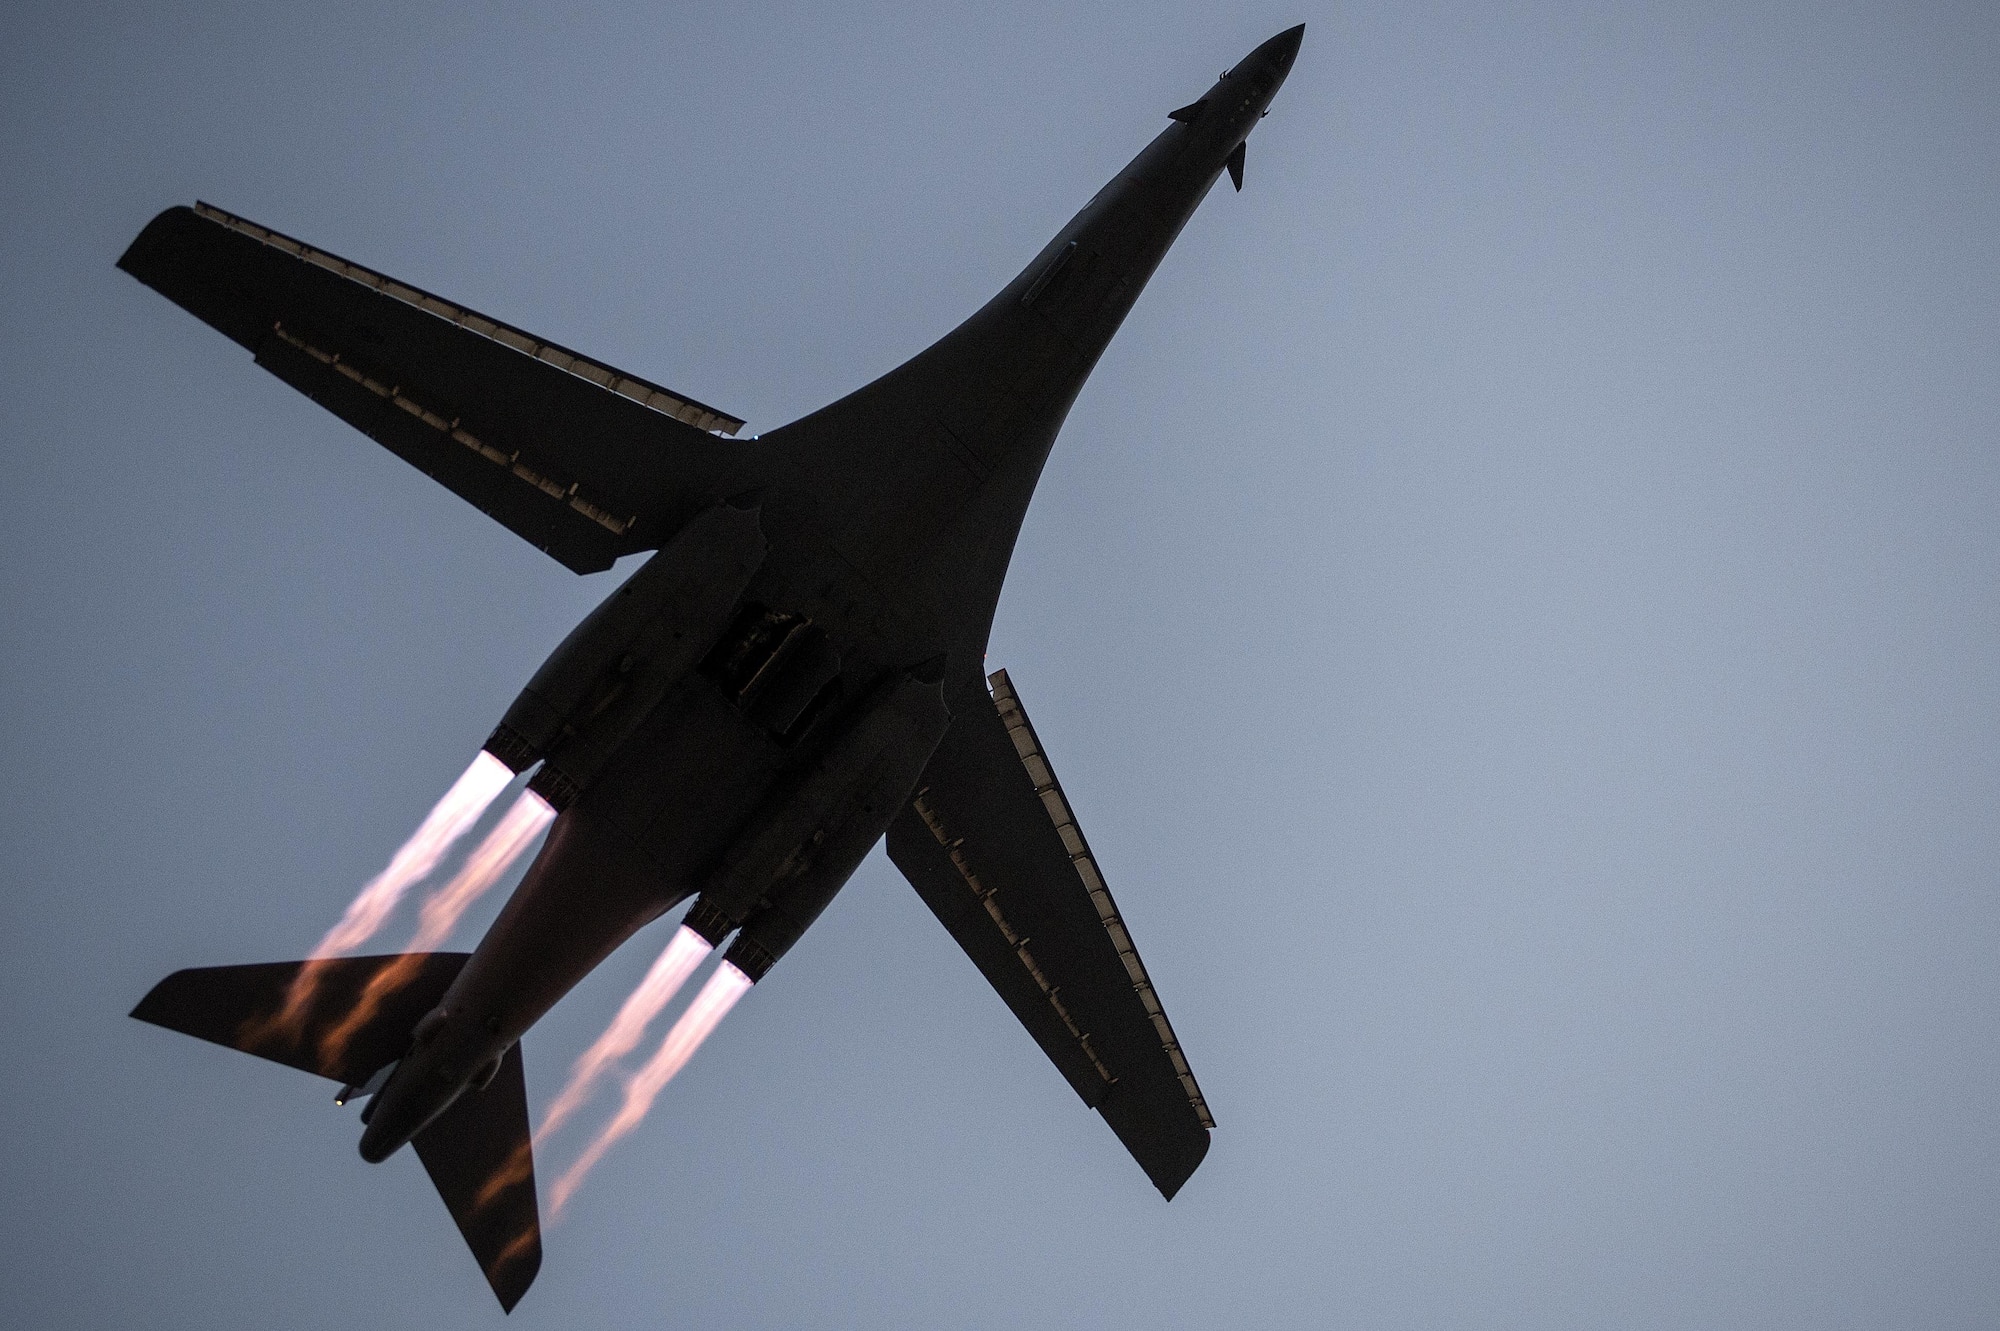 B-1B aircraft takes off overhead with afterburners